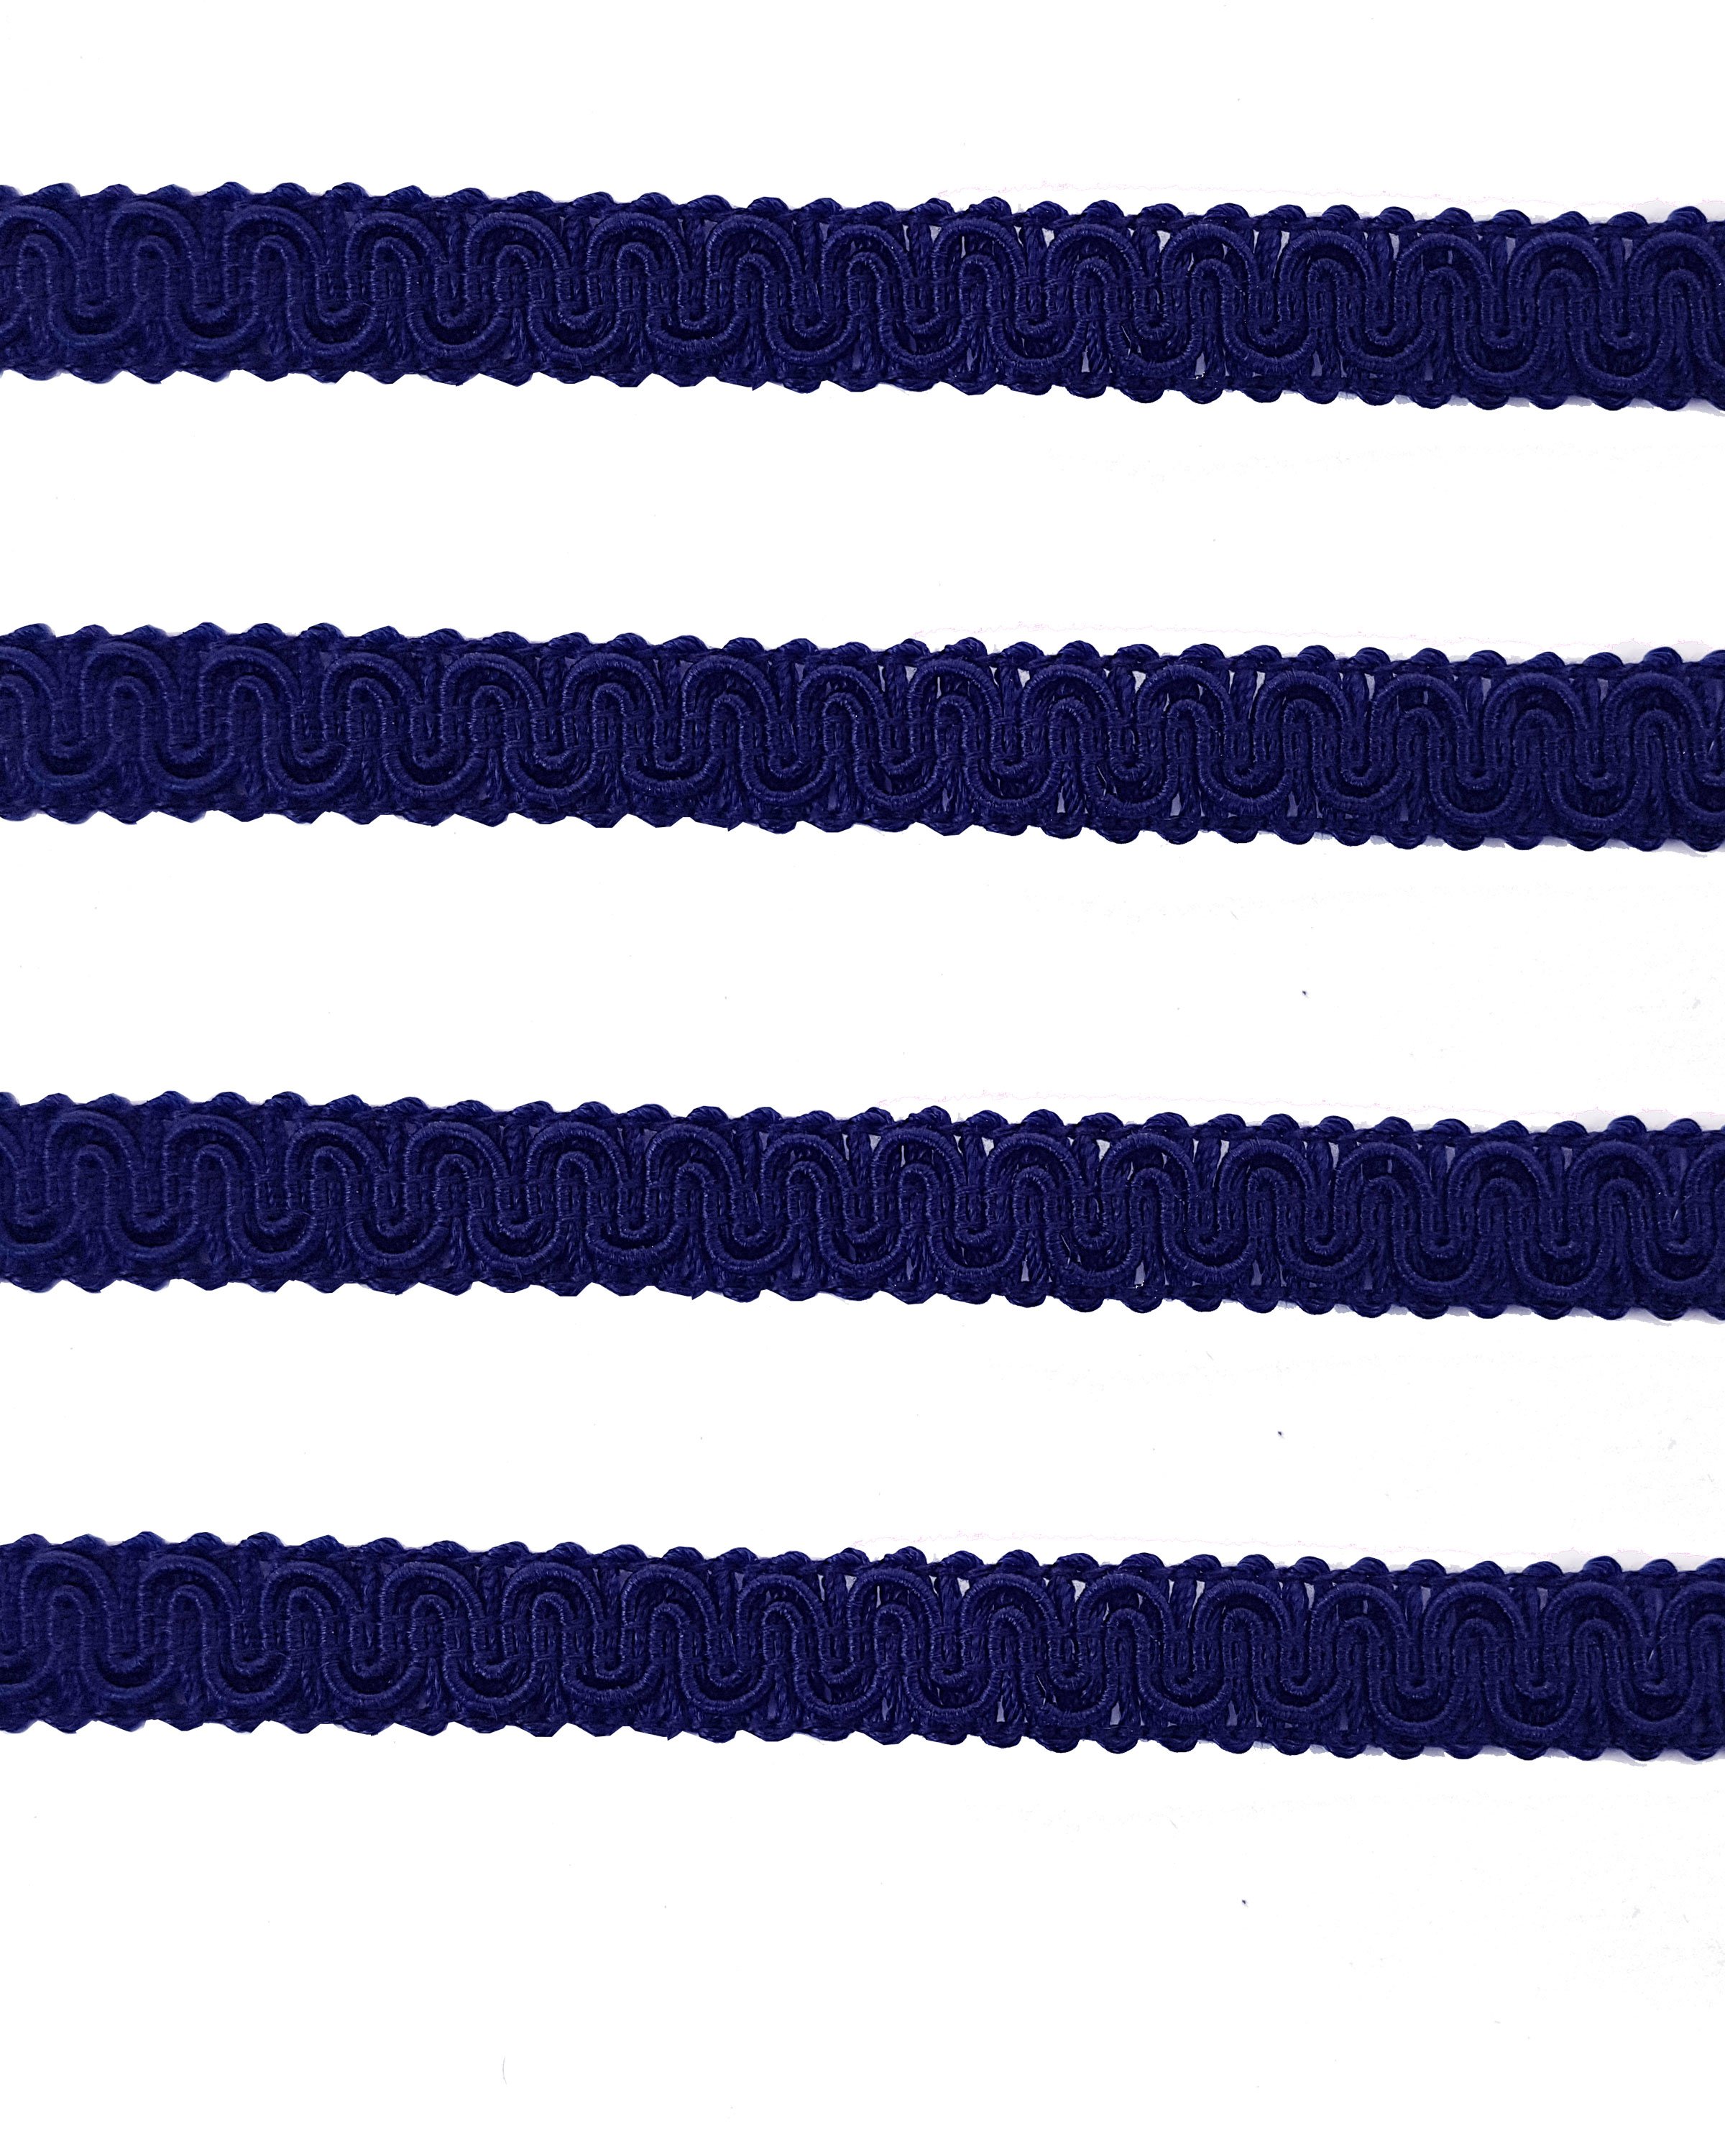 Upholstery Braid - Navy Blue 14mm Price is for 5 metres